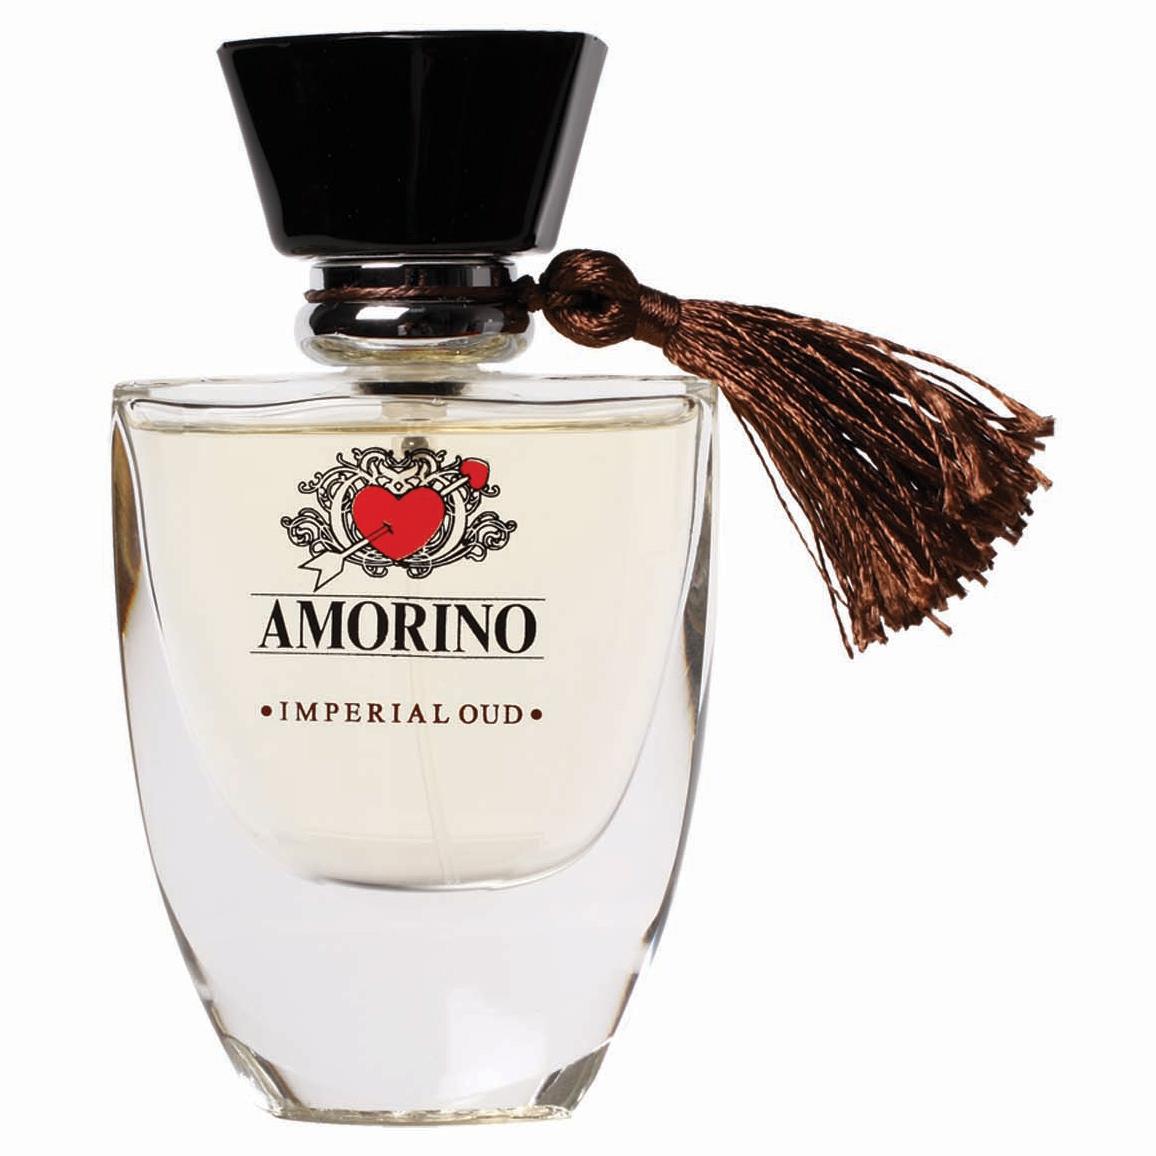 AMORINO PRIVE IMPERIAL OUD